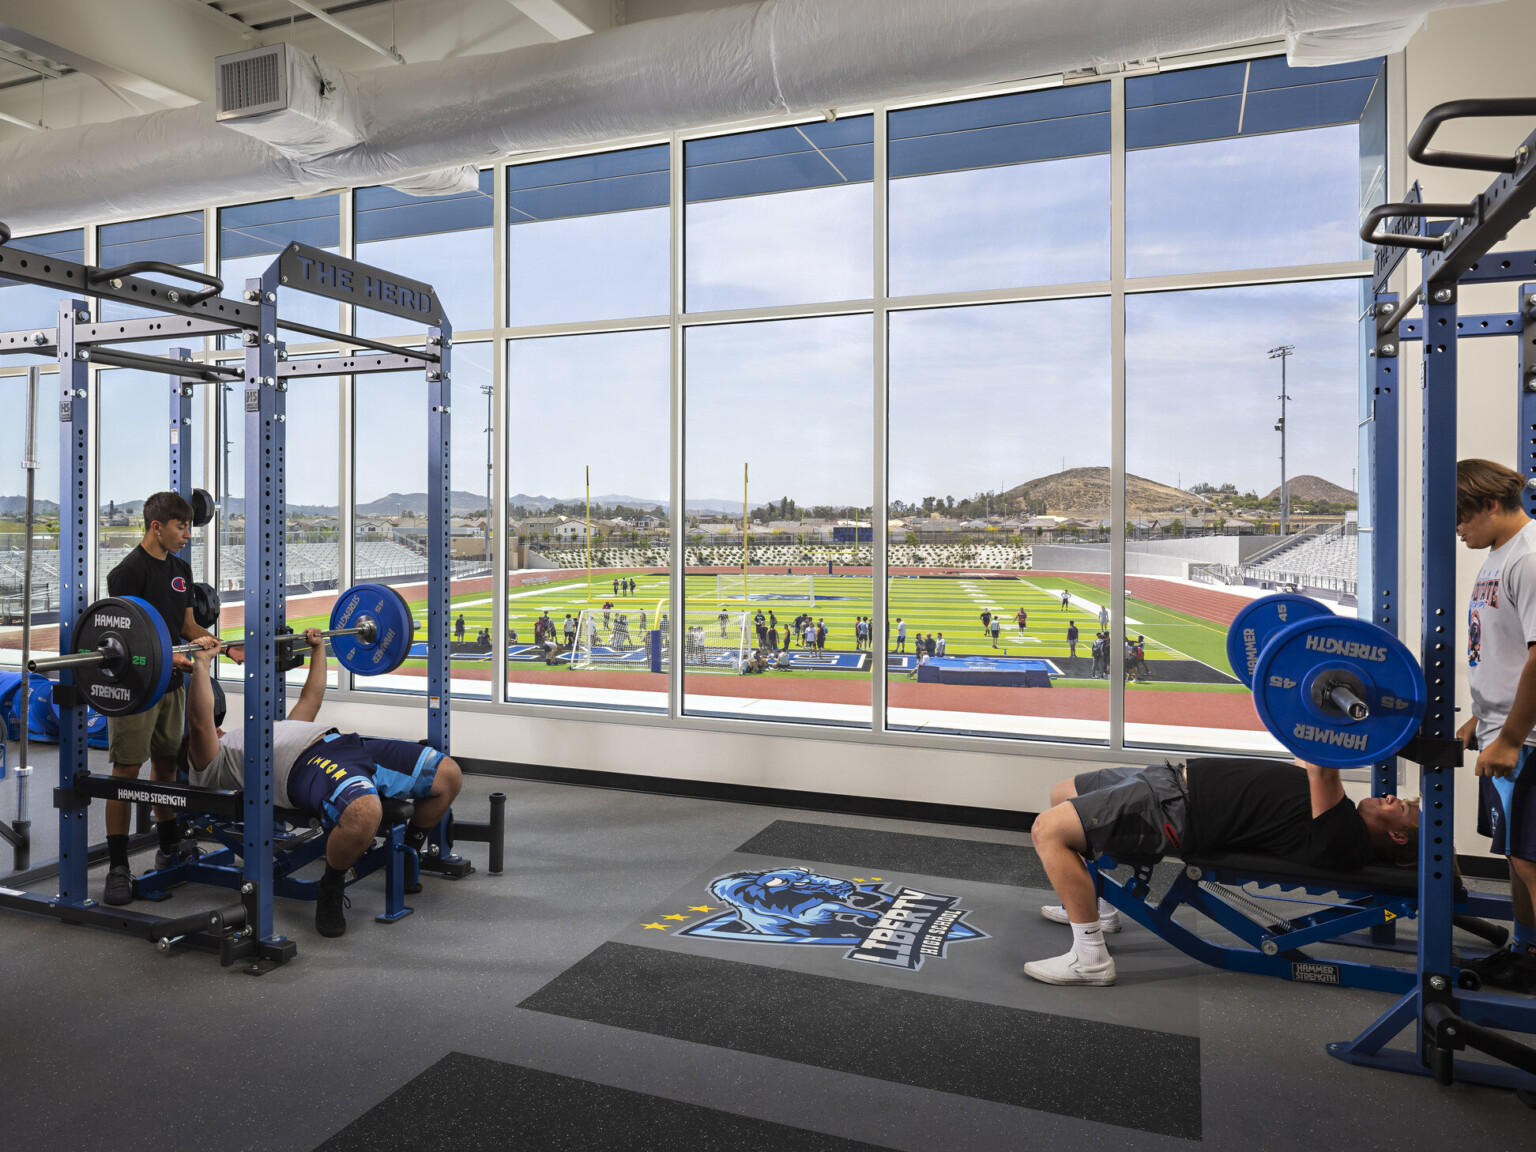 Exercise room with weight training equipment, floor to ceiling windows look out to football field and track